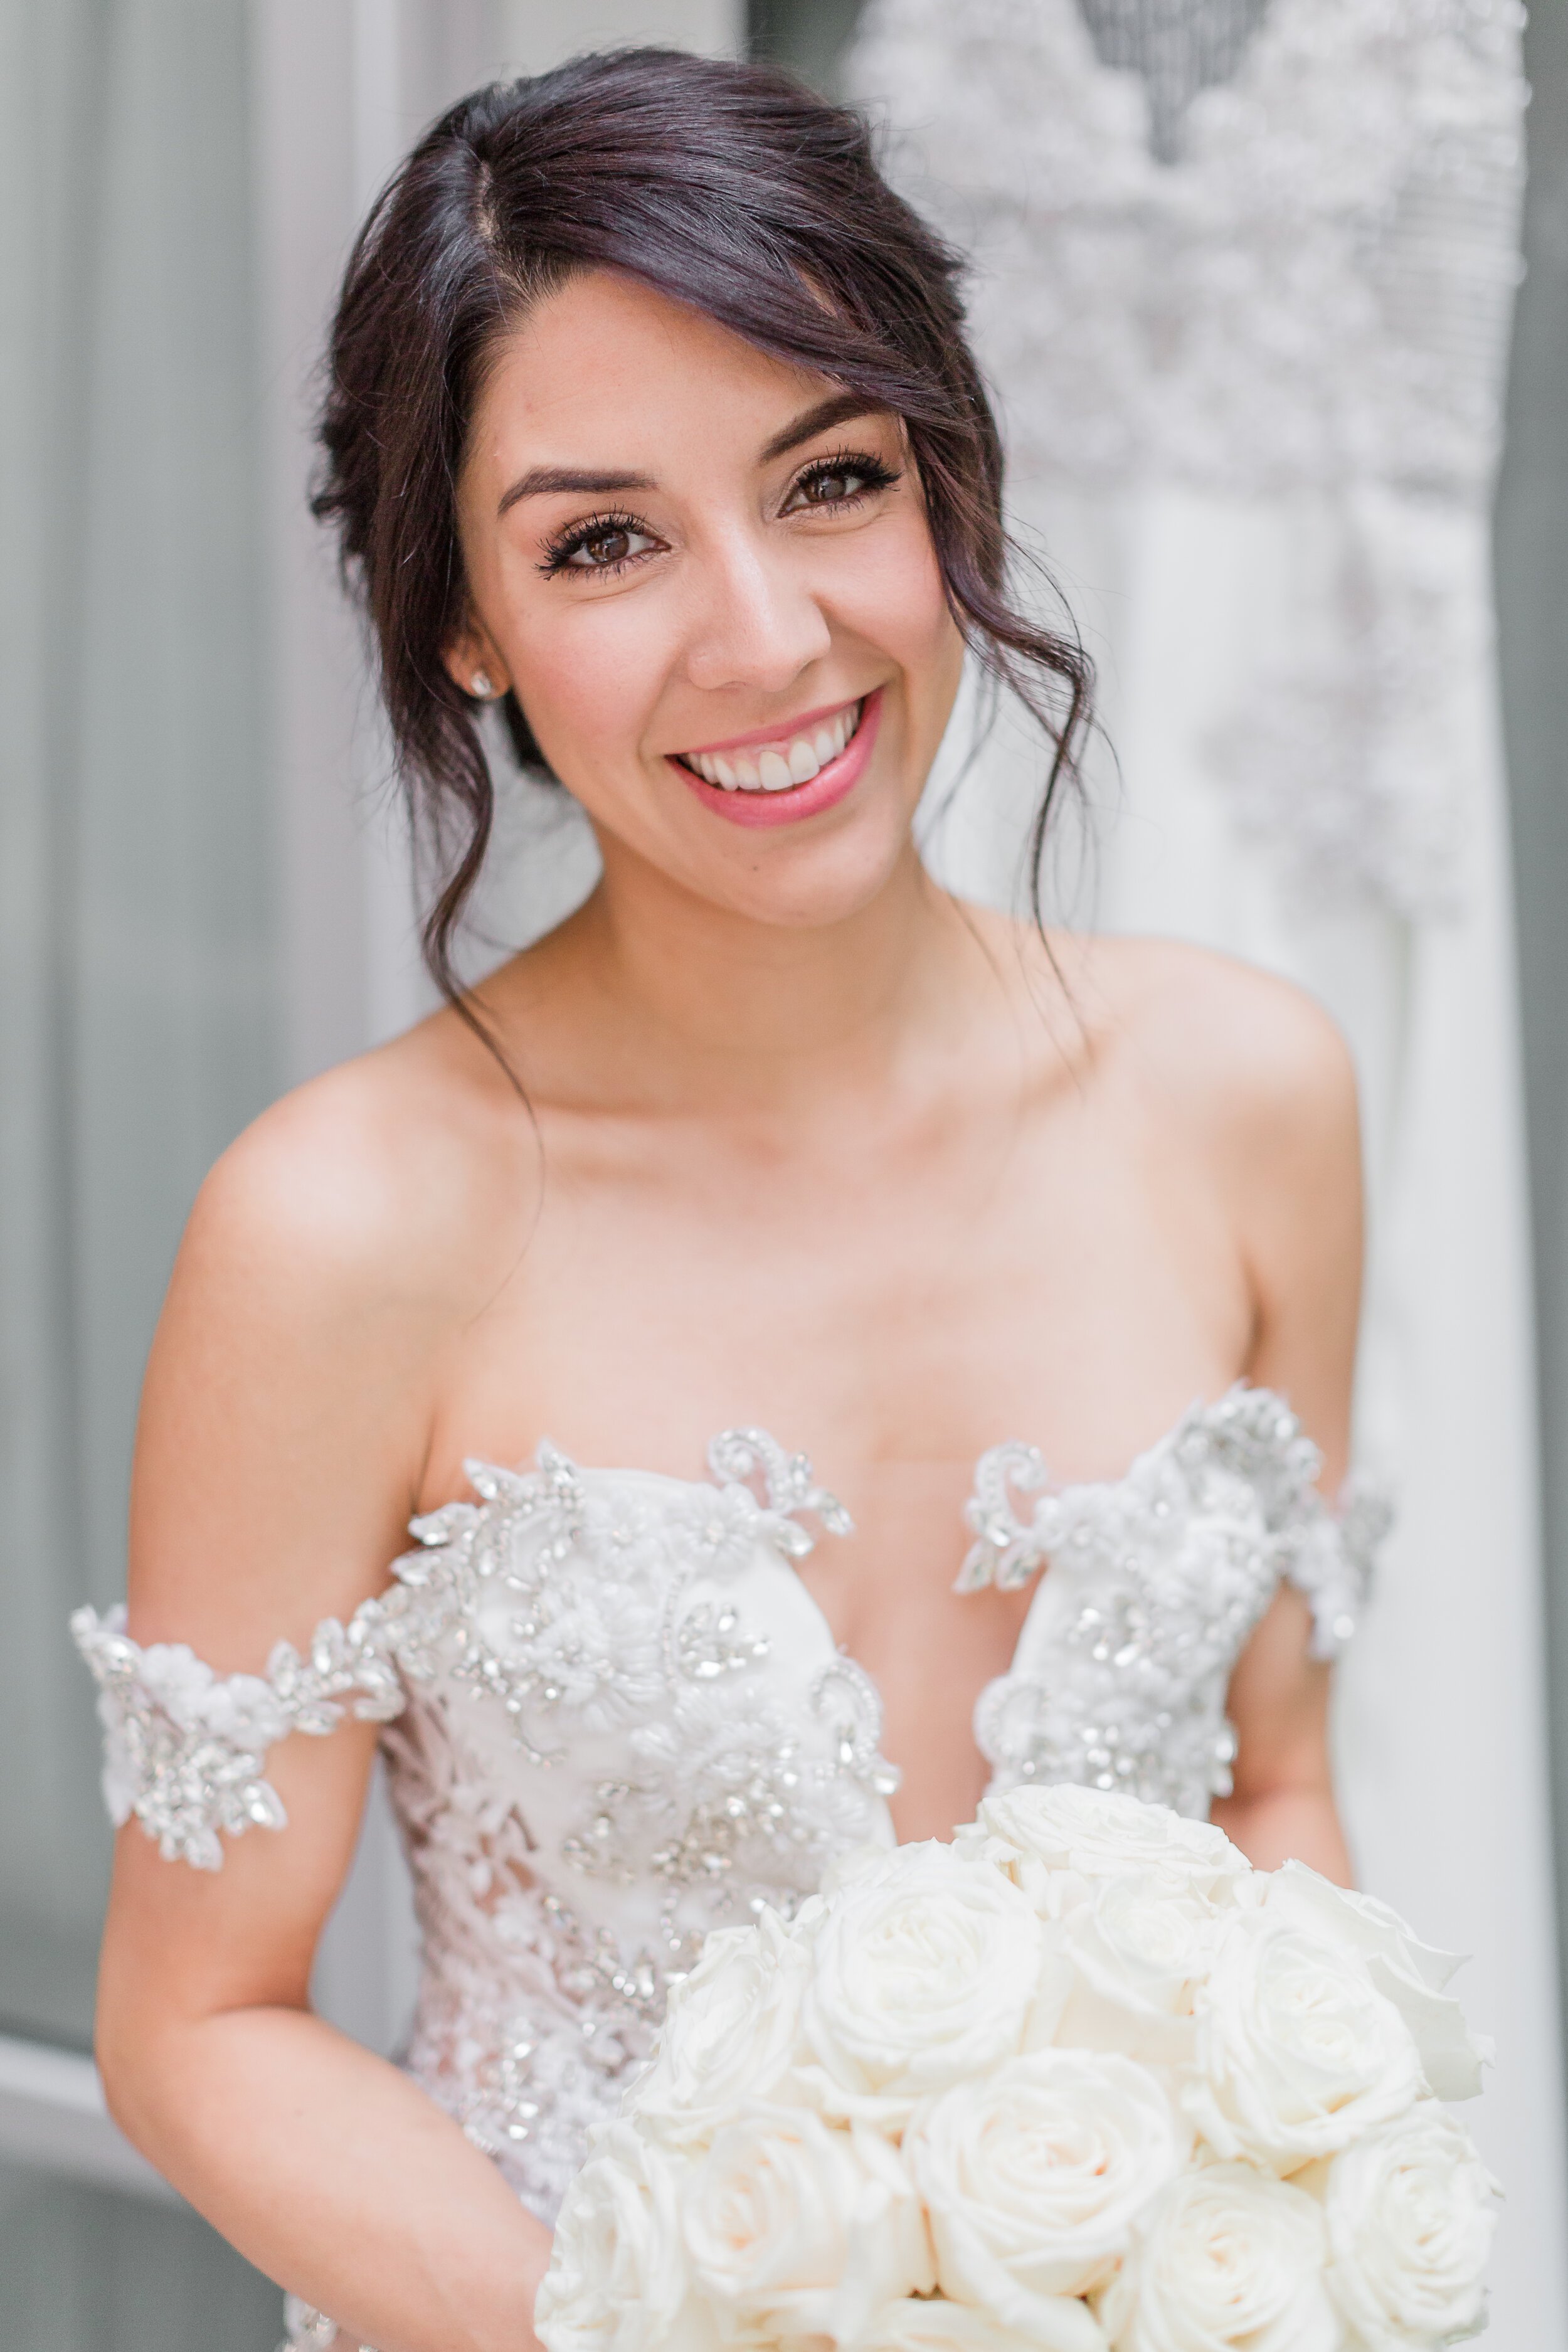 natural makeup and romantic updo for this classic and romantic bride's san diego wedding (Copy)